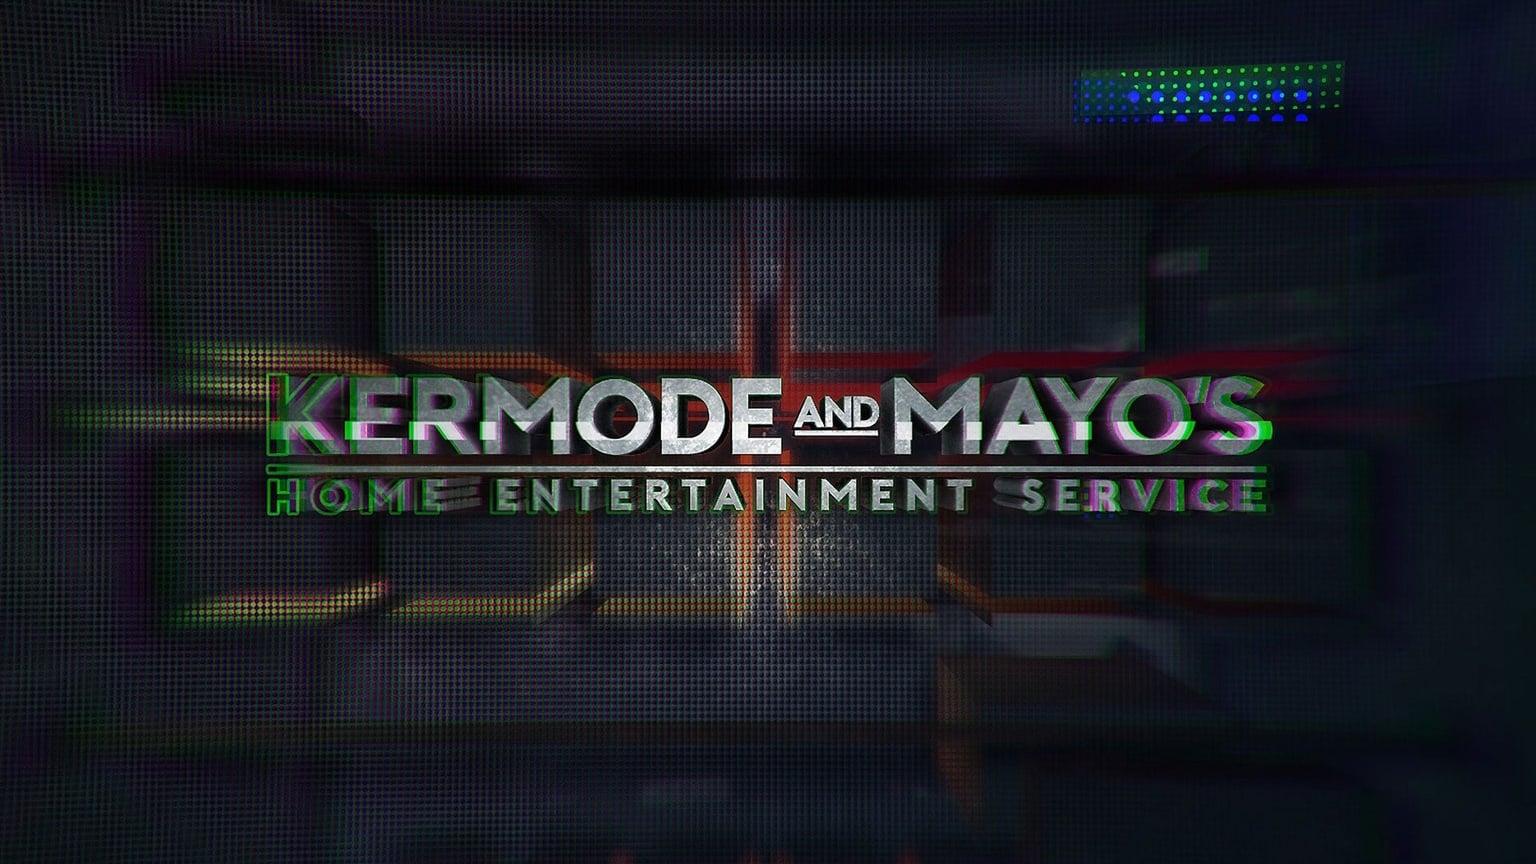 Kermode and Mayo’s Home Entertainment Service backdrop